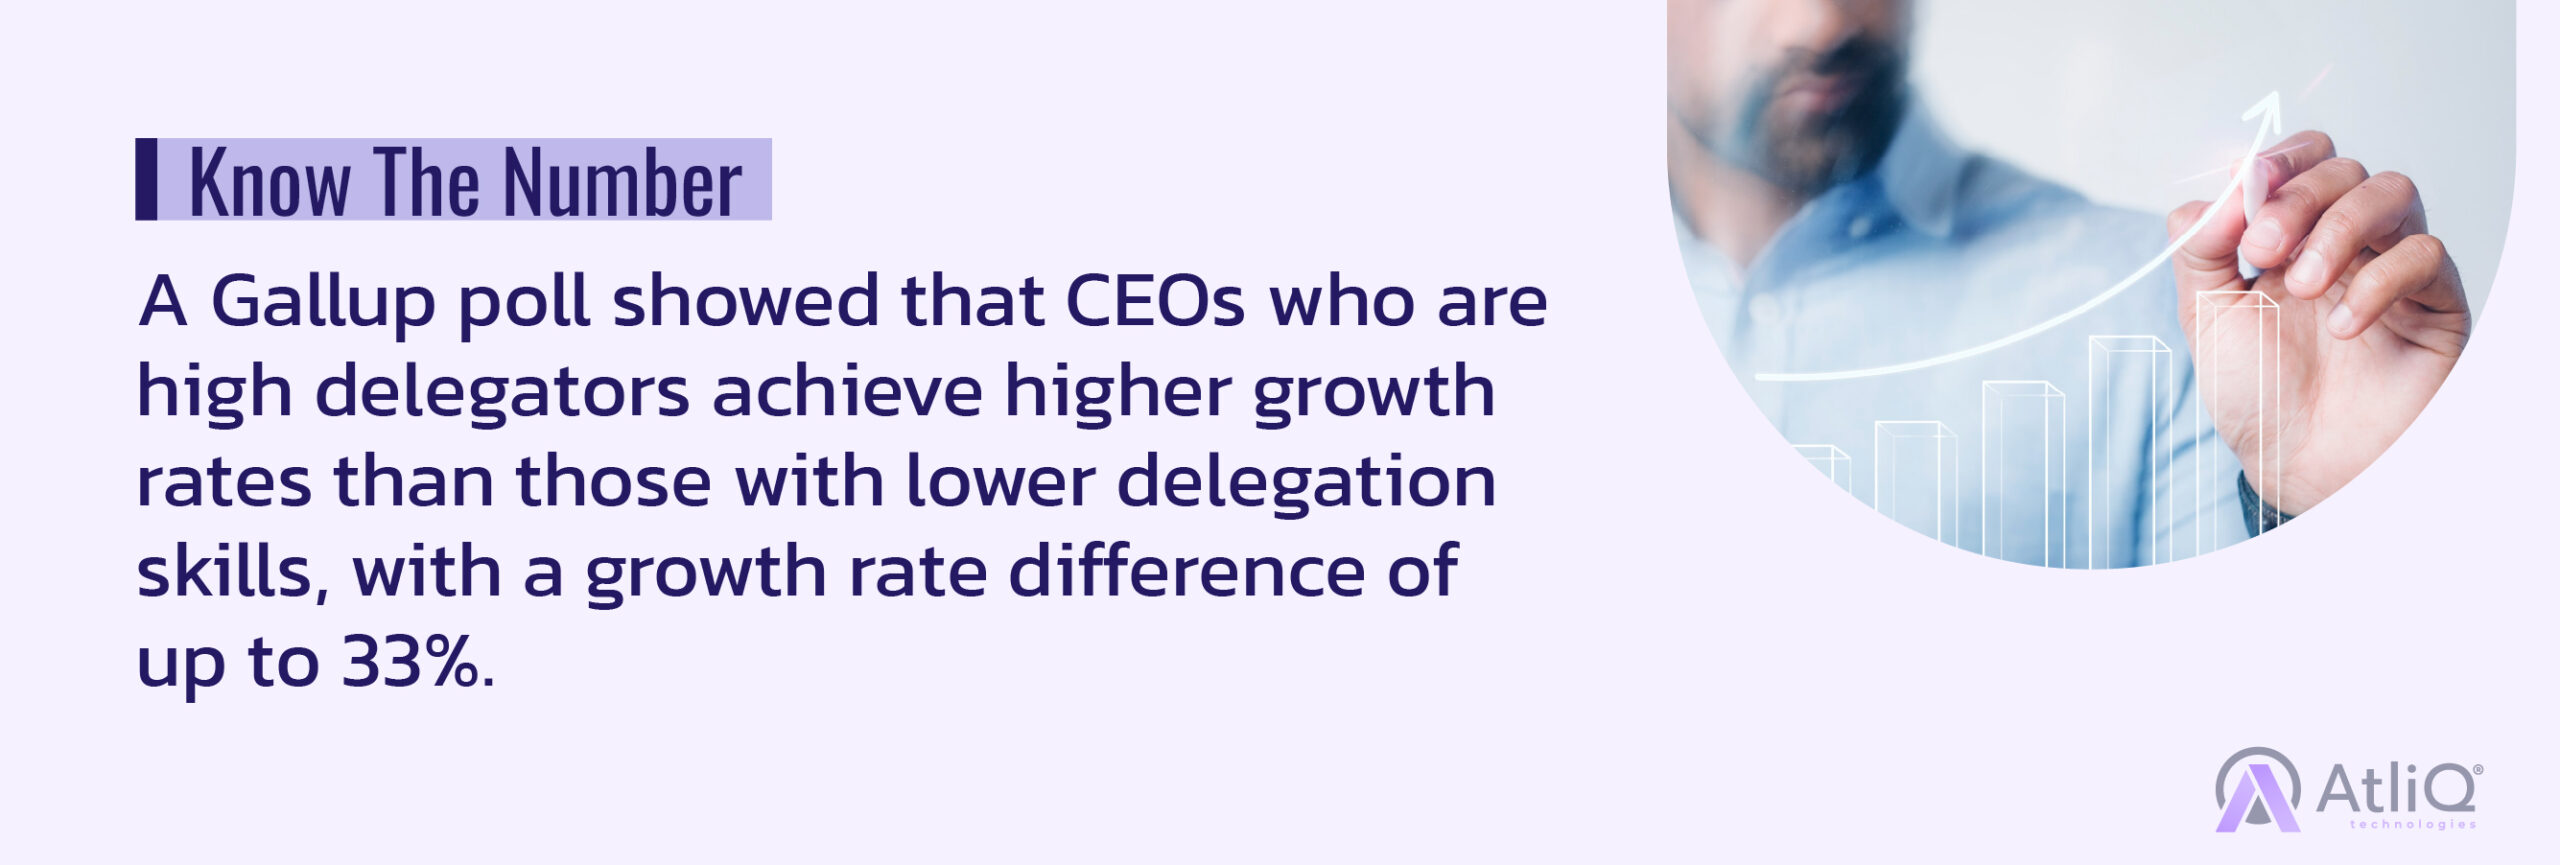 A Gallup poll showed that CEOs who are high delegators achieve higher growth rates than those with lower delegation skills, with a growth rate difference of up to 33%